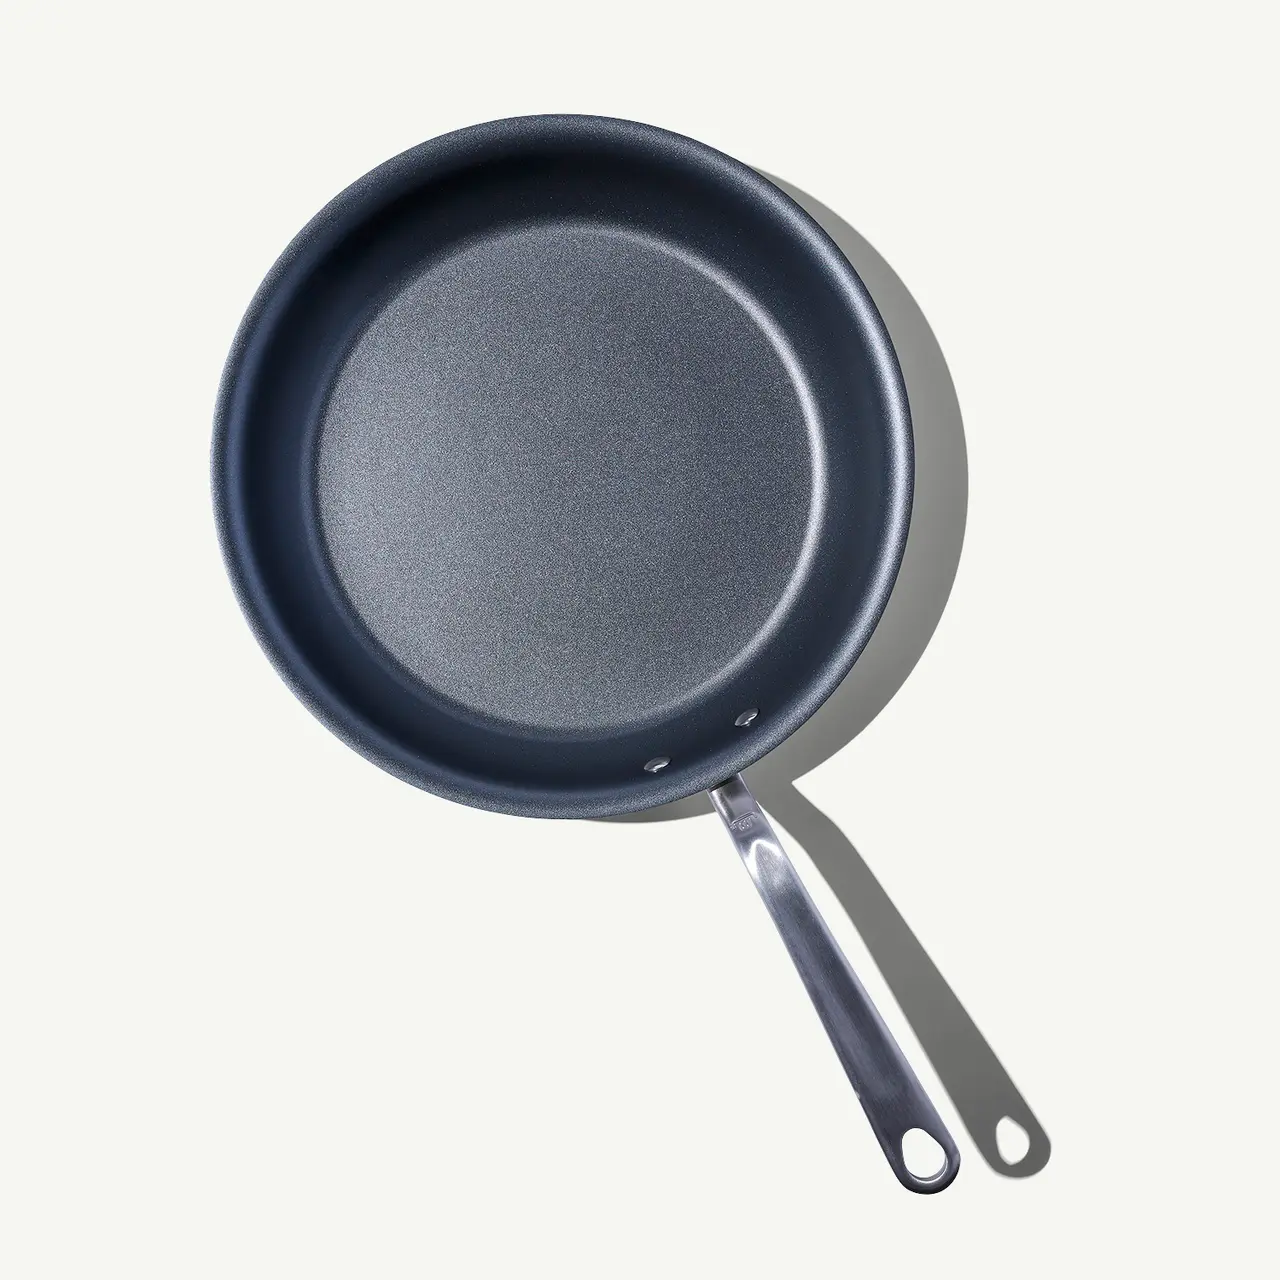 A top-down view of two non-stick frying pans with silver handles on a light background.